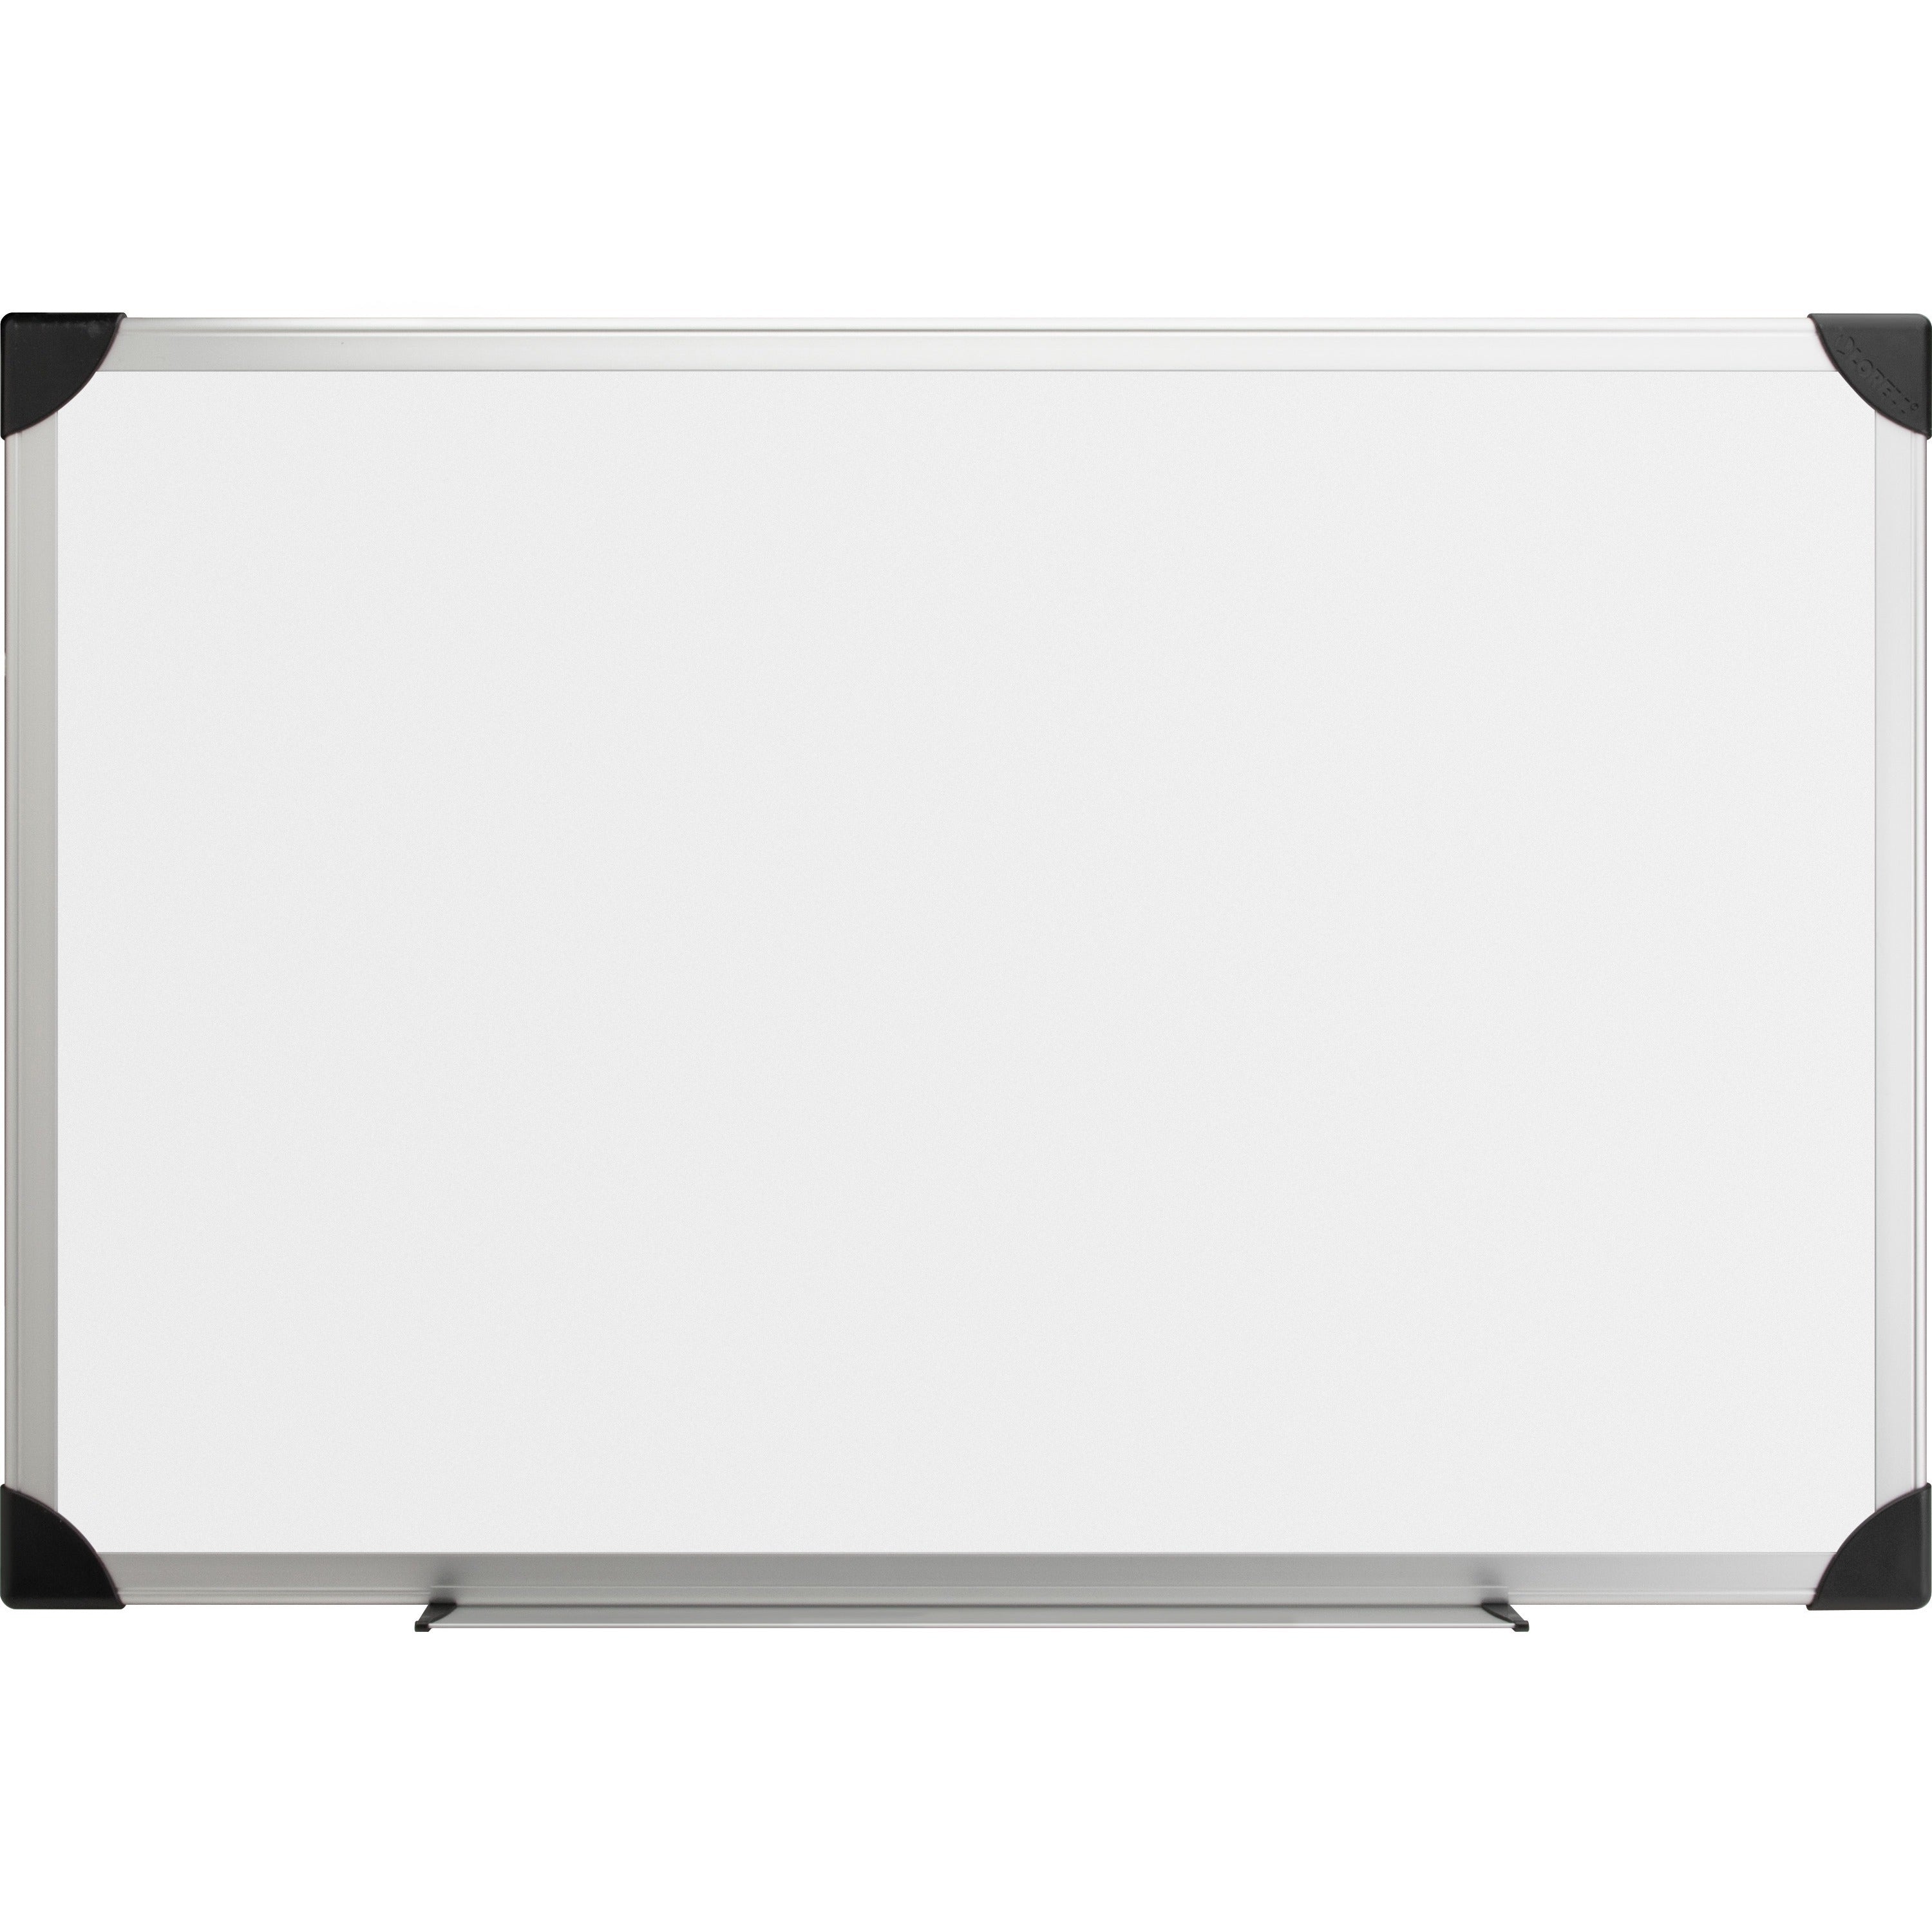 Lorell Dry-erase Board - 24" (2 ft) Width x 18" (1.5 ft) Height - White Styrene Surface - Aluminum Frame - Ghost Resistant, Scratch Resistant - 1 Each - 